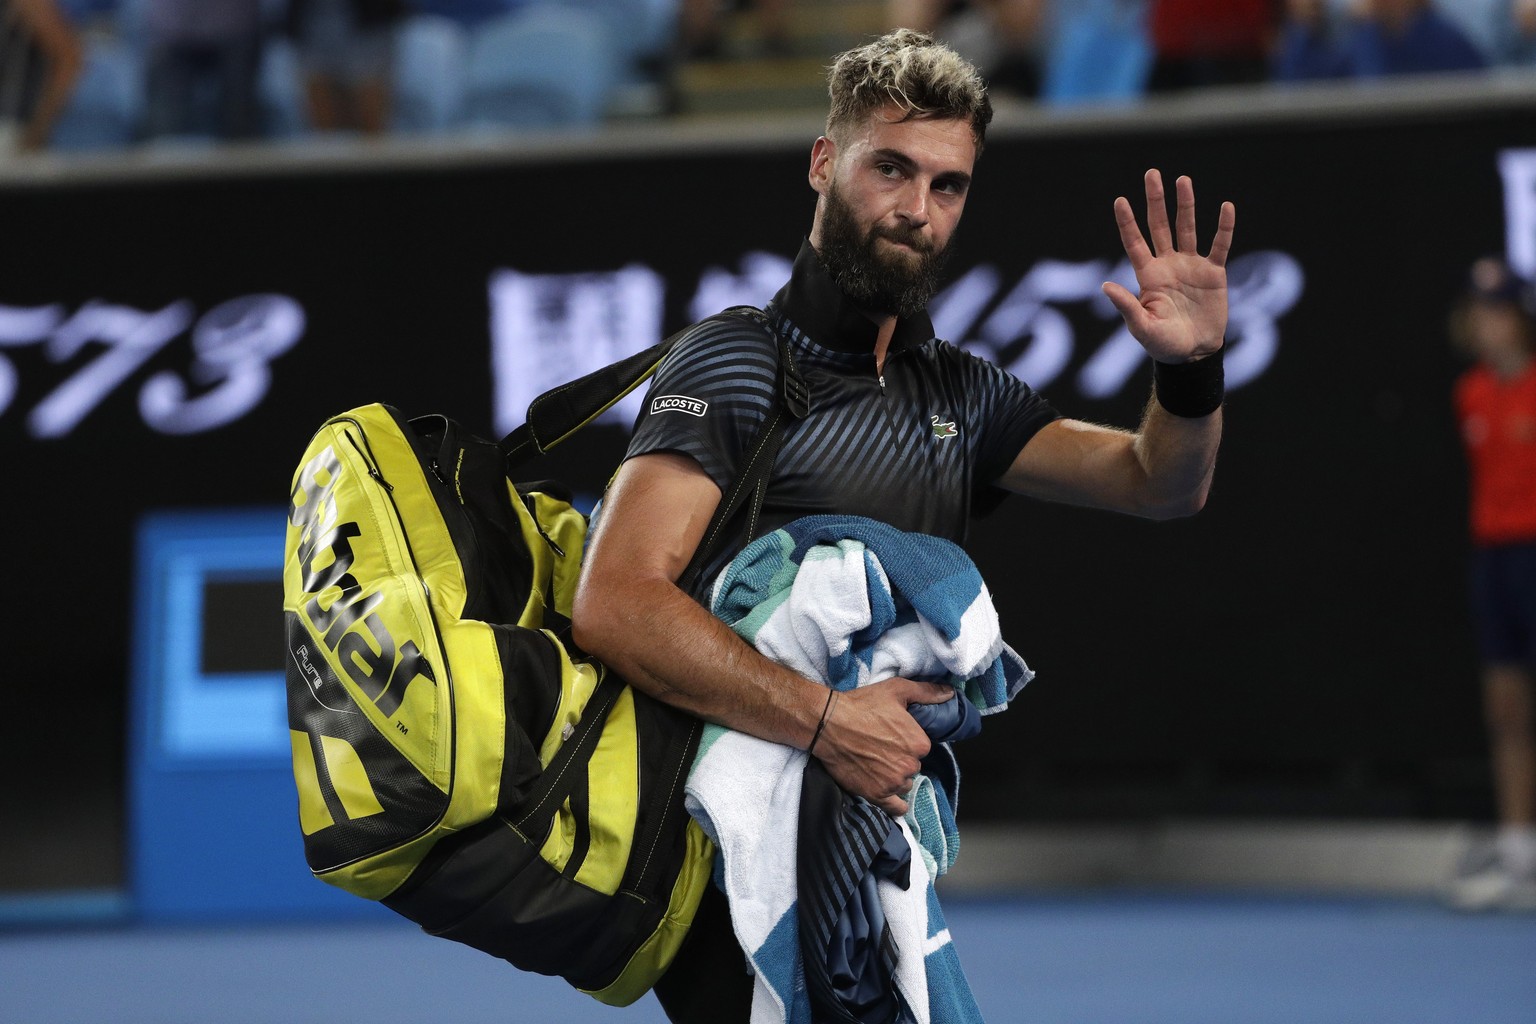 France&#039;s Benoit Paire leaves the court after losing to Austria&#039;s Dominic Thiem in their first round match at the Australian Open tennis championships in Melbourne, Australia, early Wednesday ...